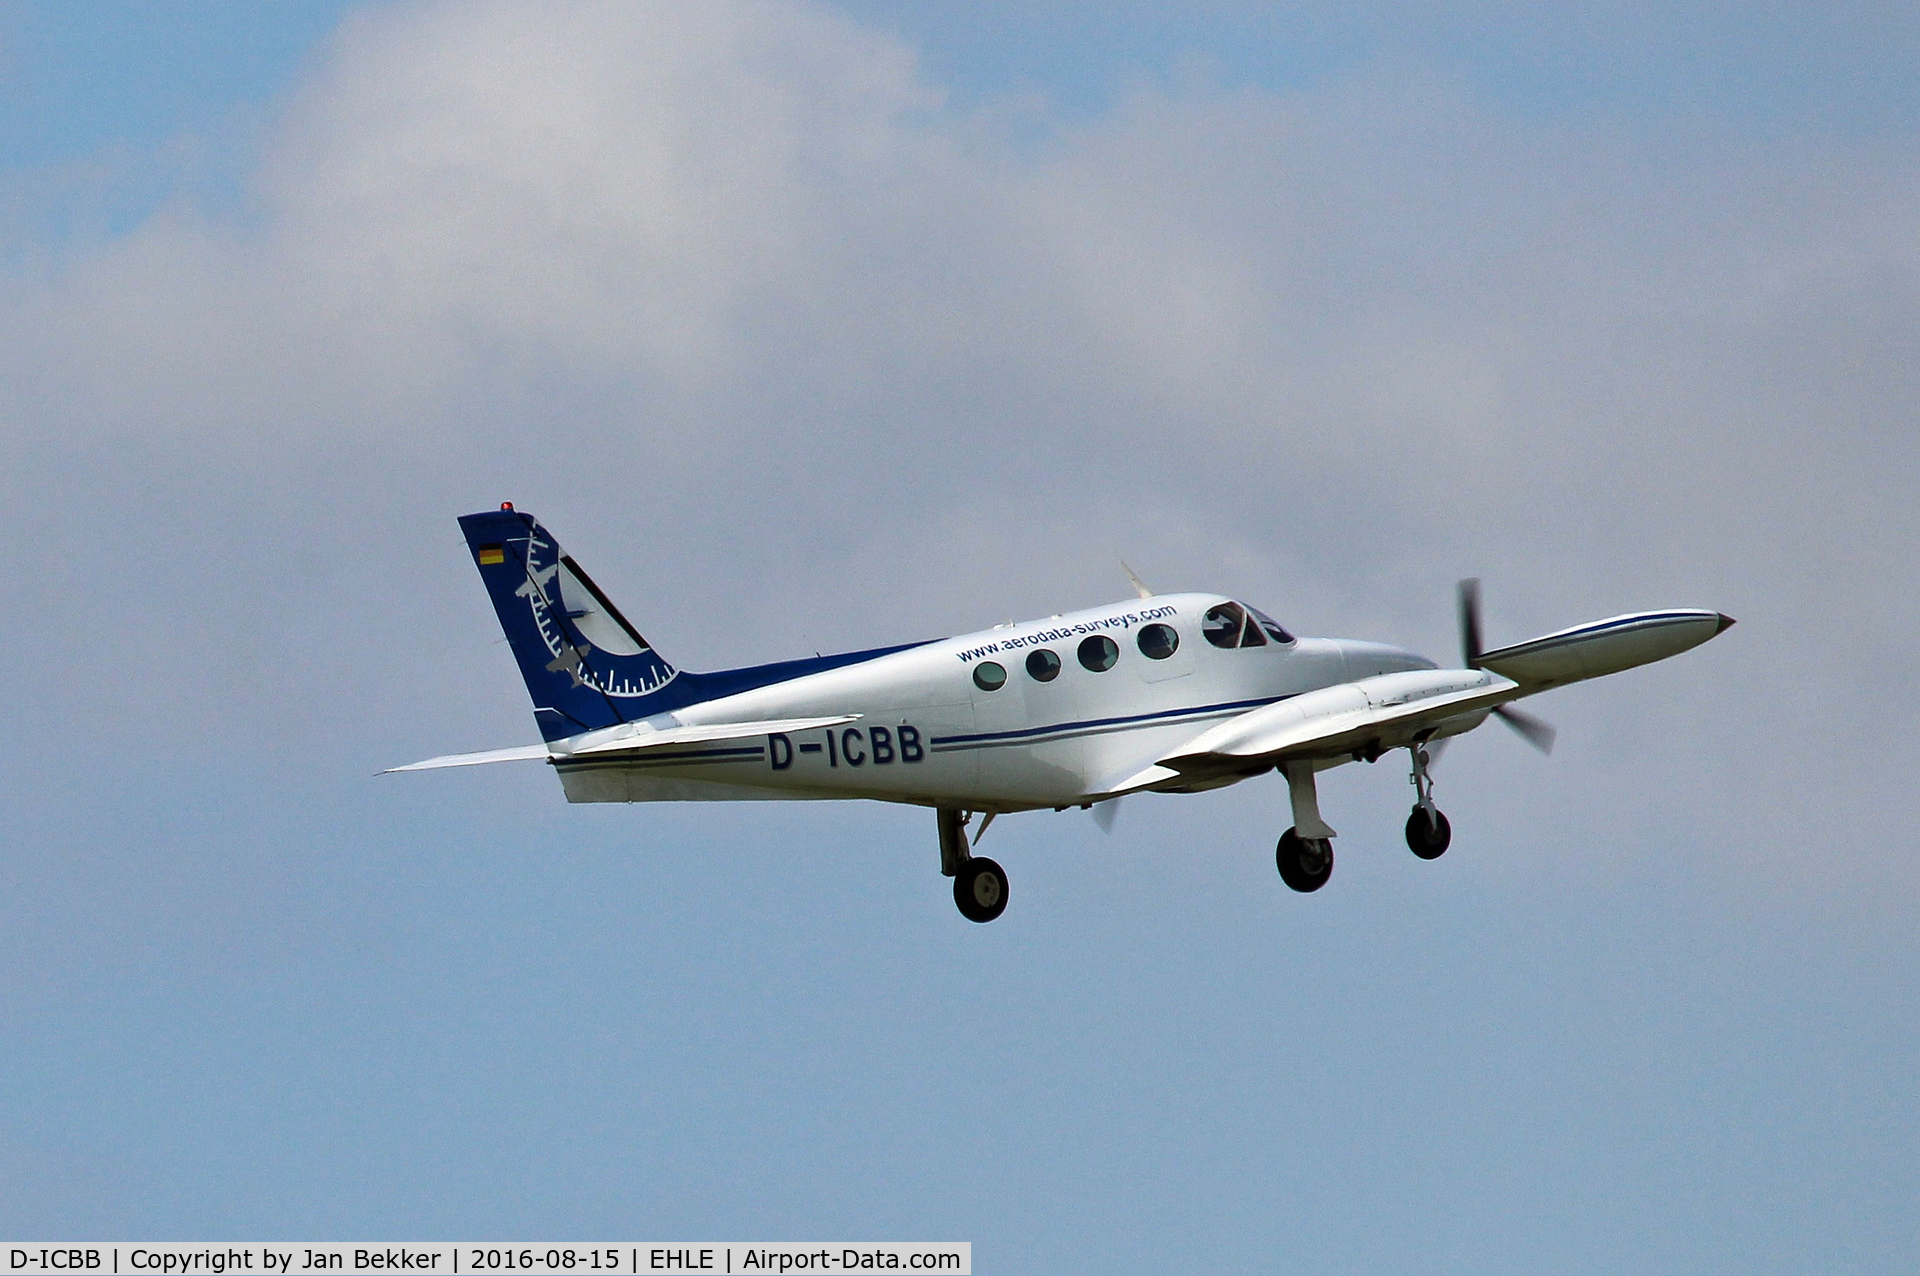 D-ICBB, 1978 Cessna 340A C/N 340A-0541, Taking off from Lelystad Airport